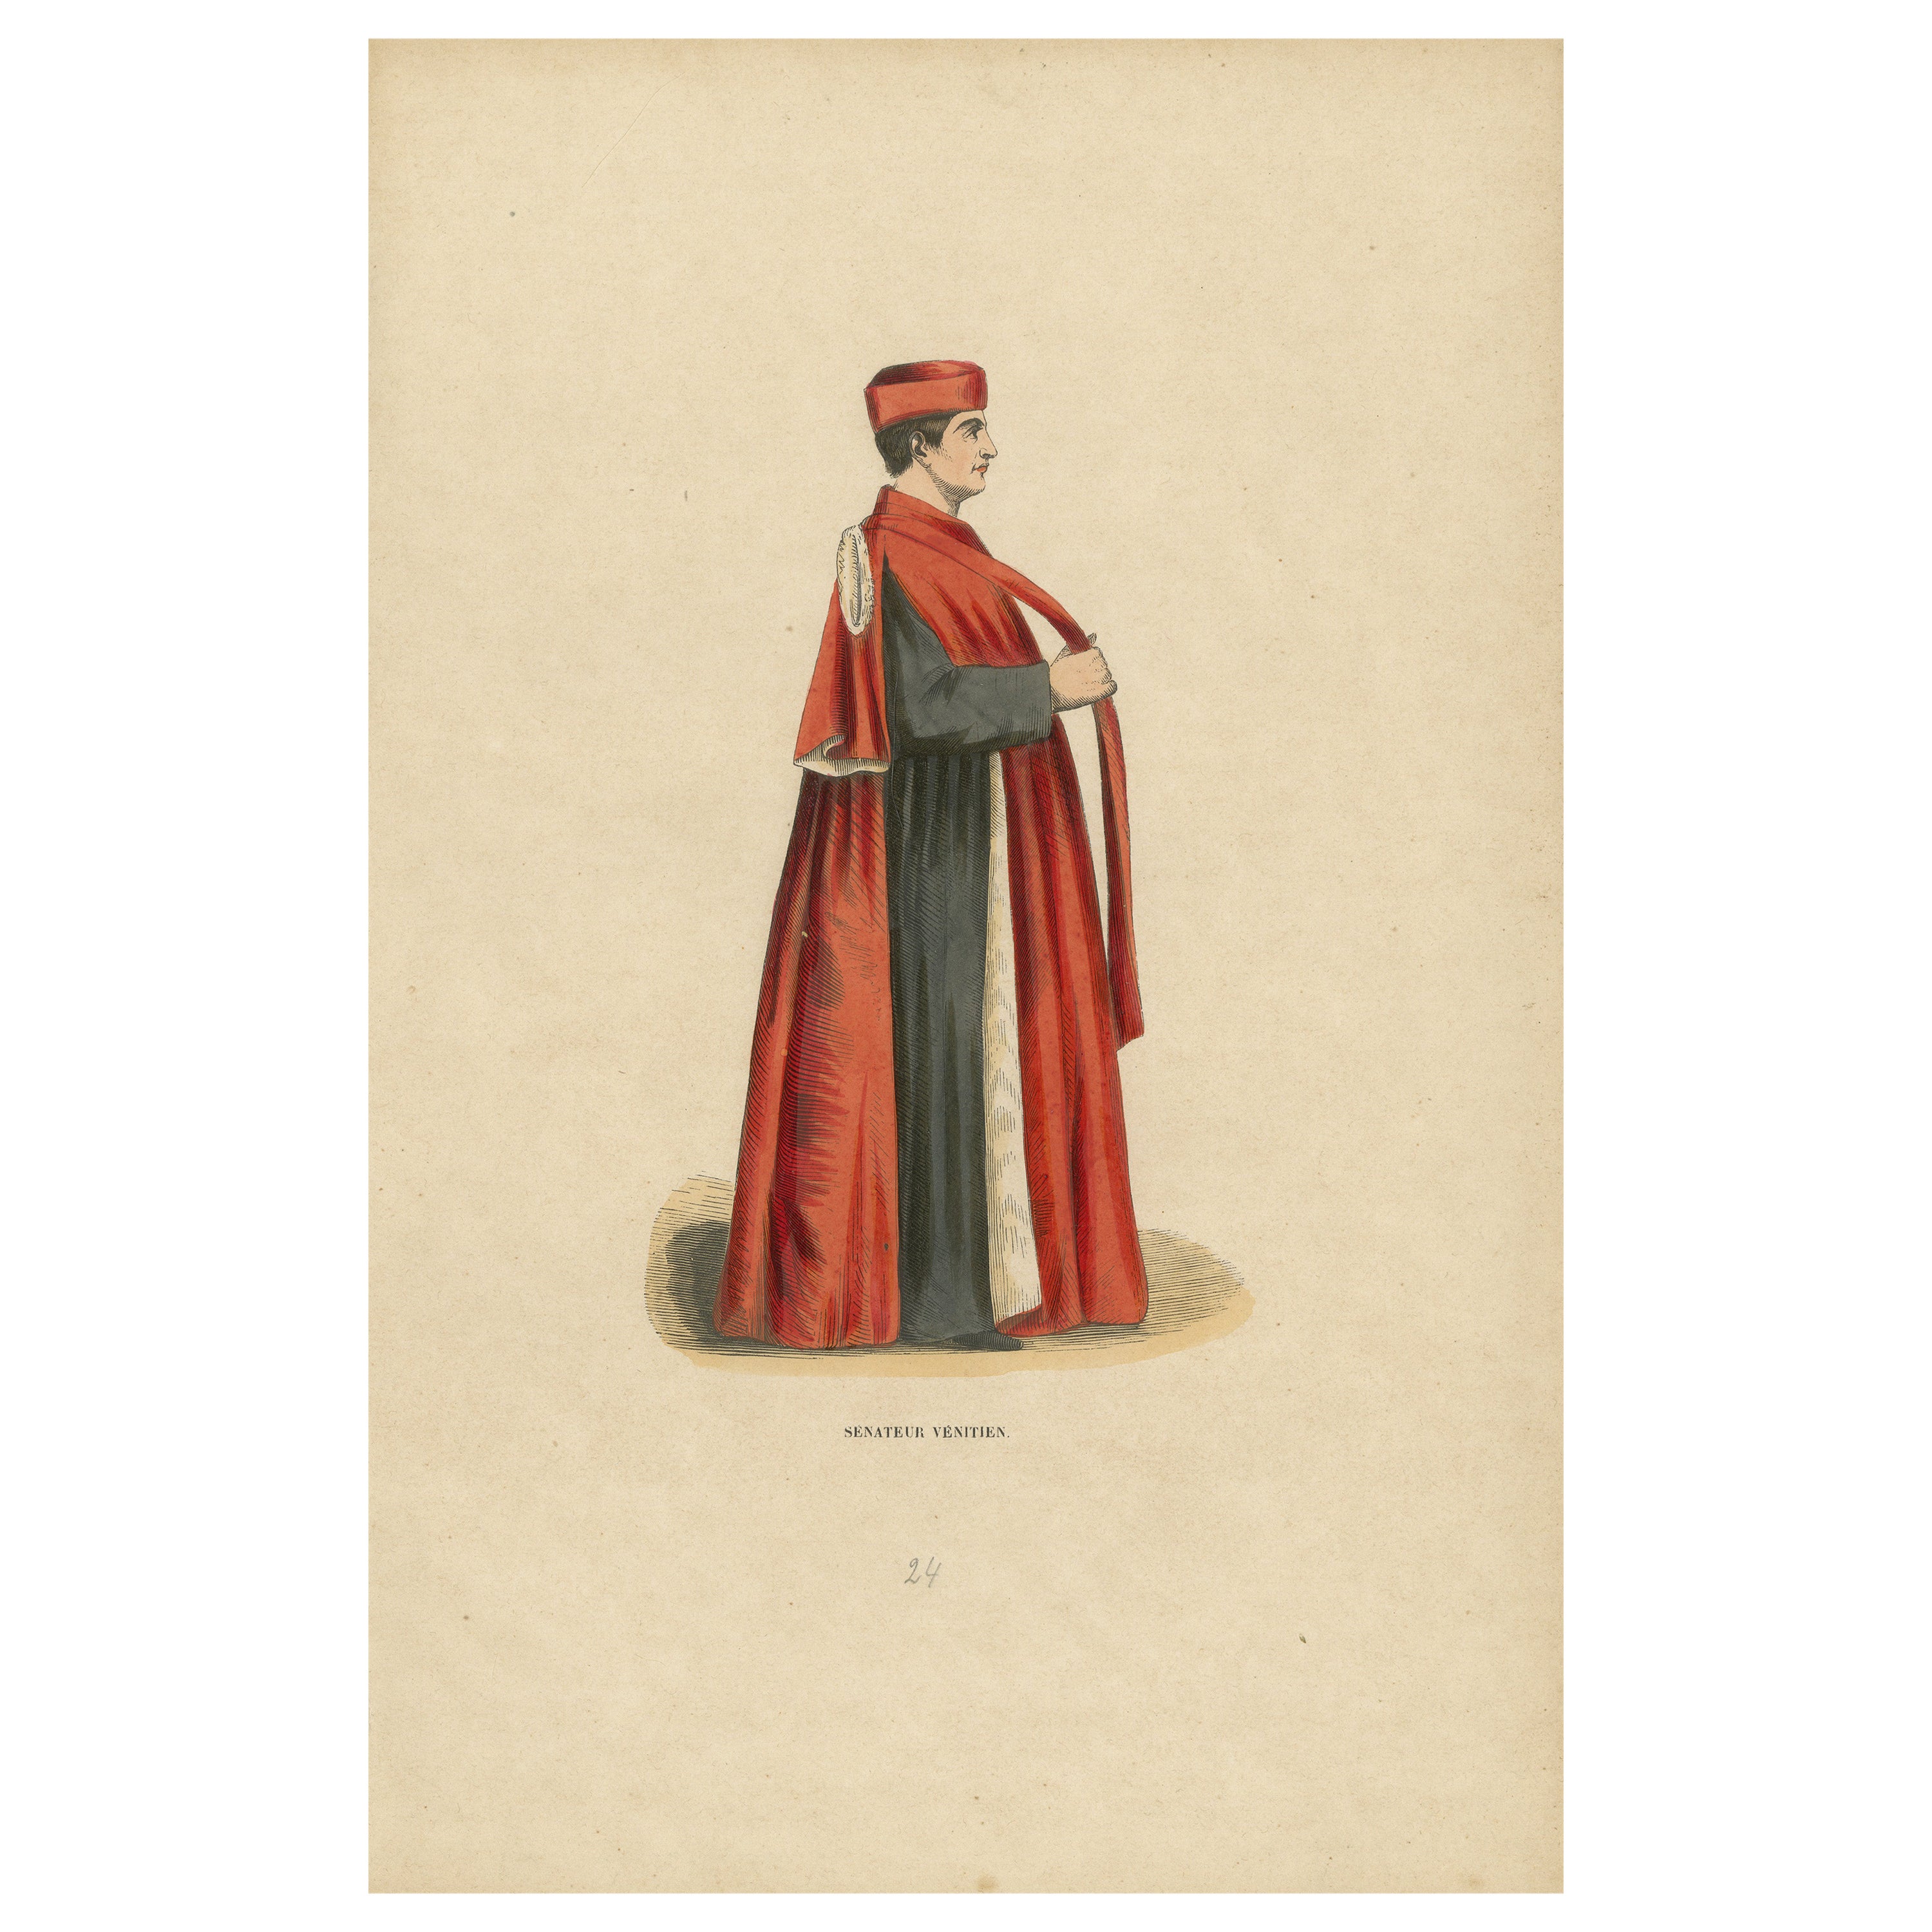 In Council and Commerce: A Venetian Senator in Robes of Office, 1847